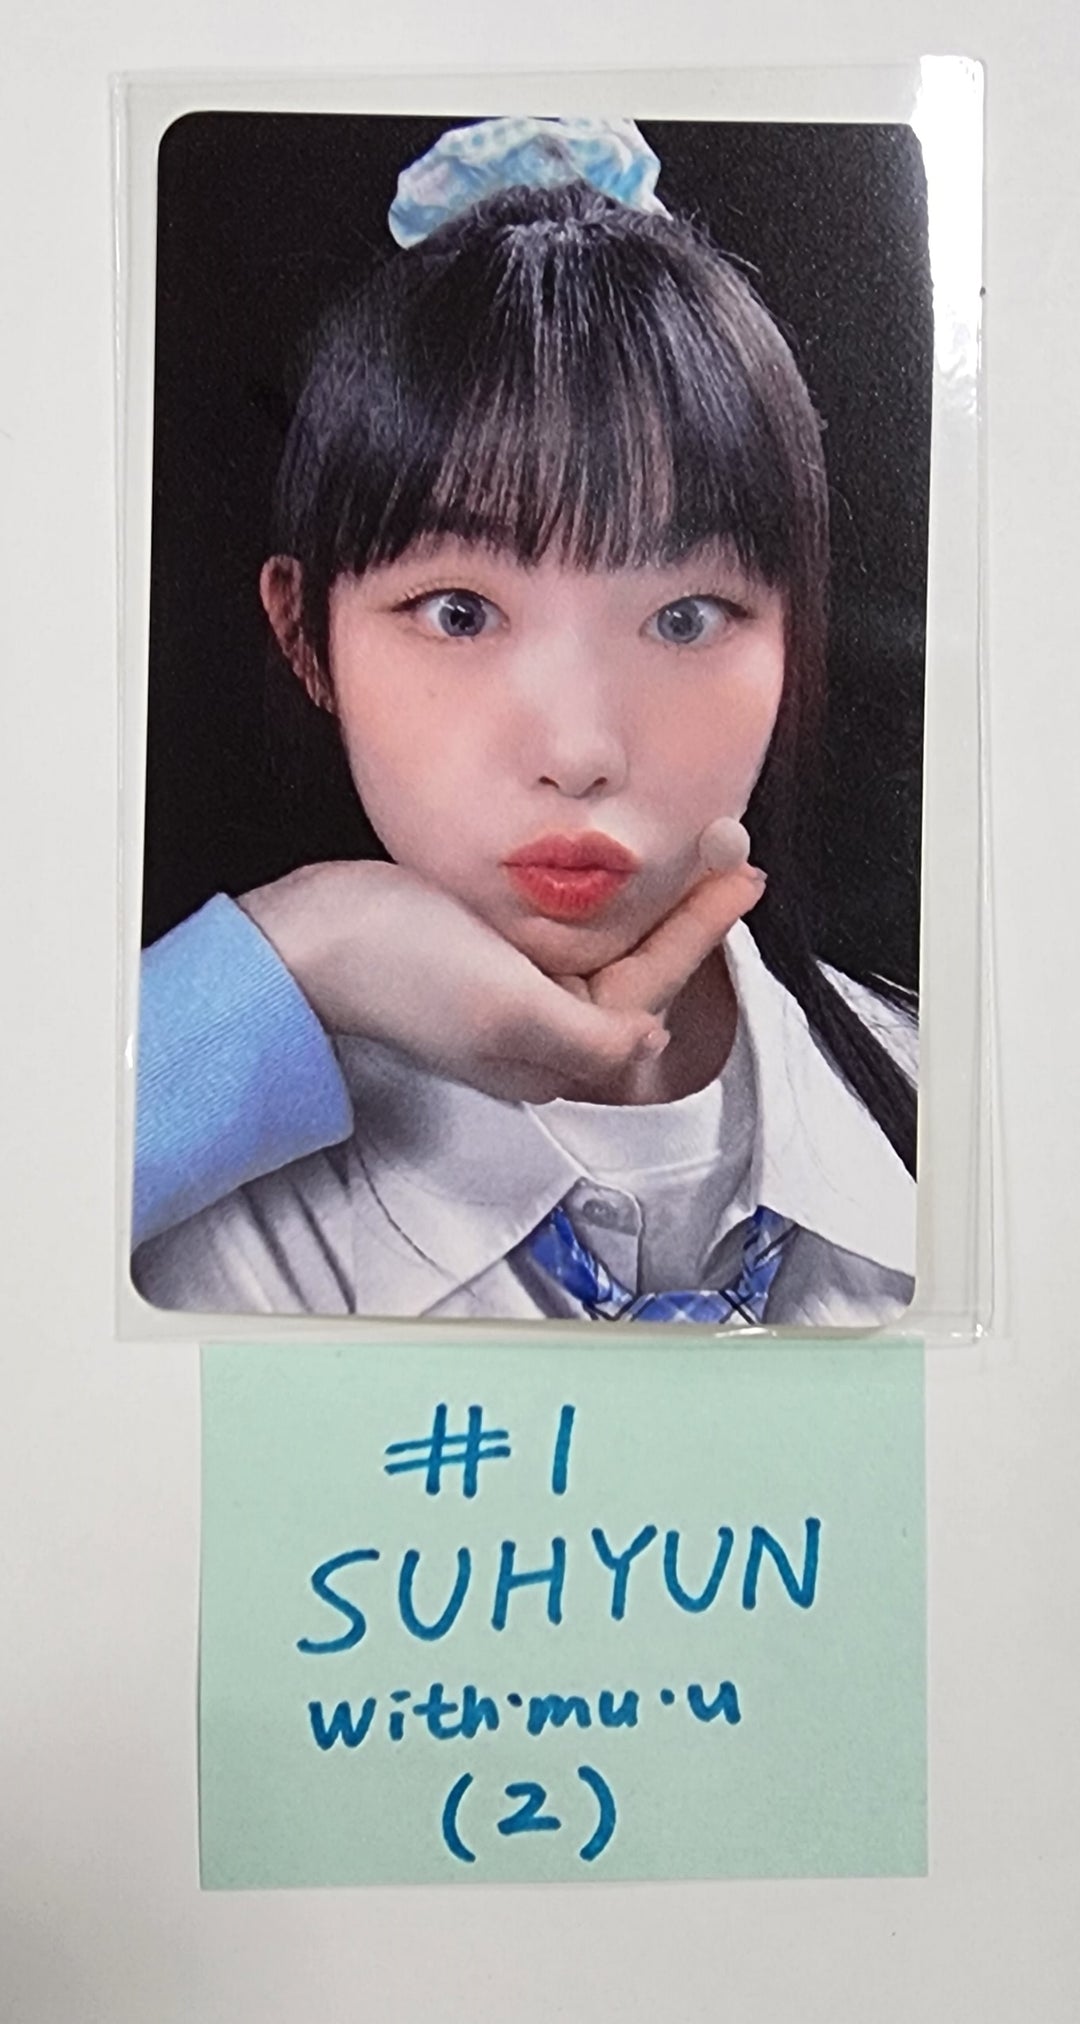 Billlie "the Billage of perception: chapter three" Mini 4th - Withmuu Fansign Event Photocard Round 4